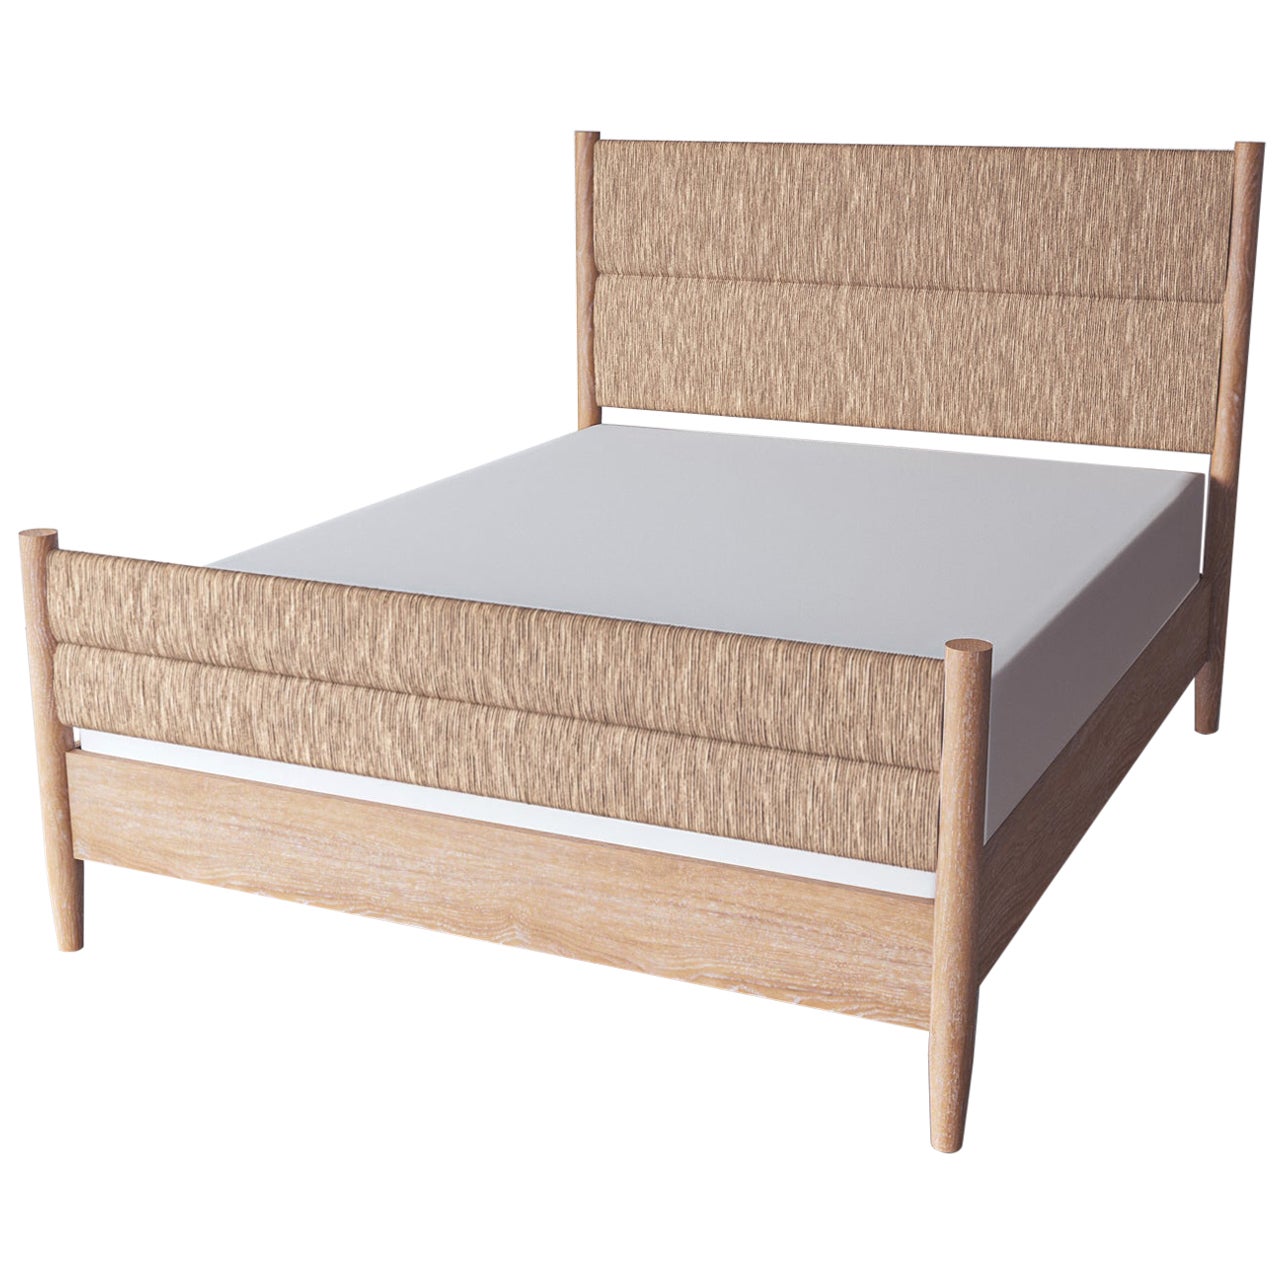 Do you need a box spring with a bed frame?